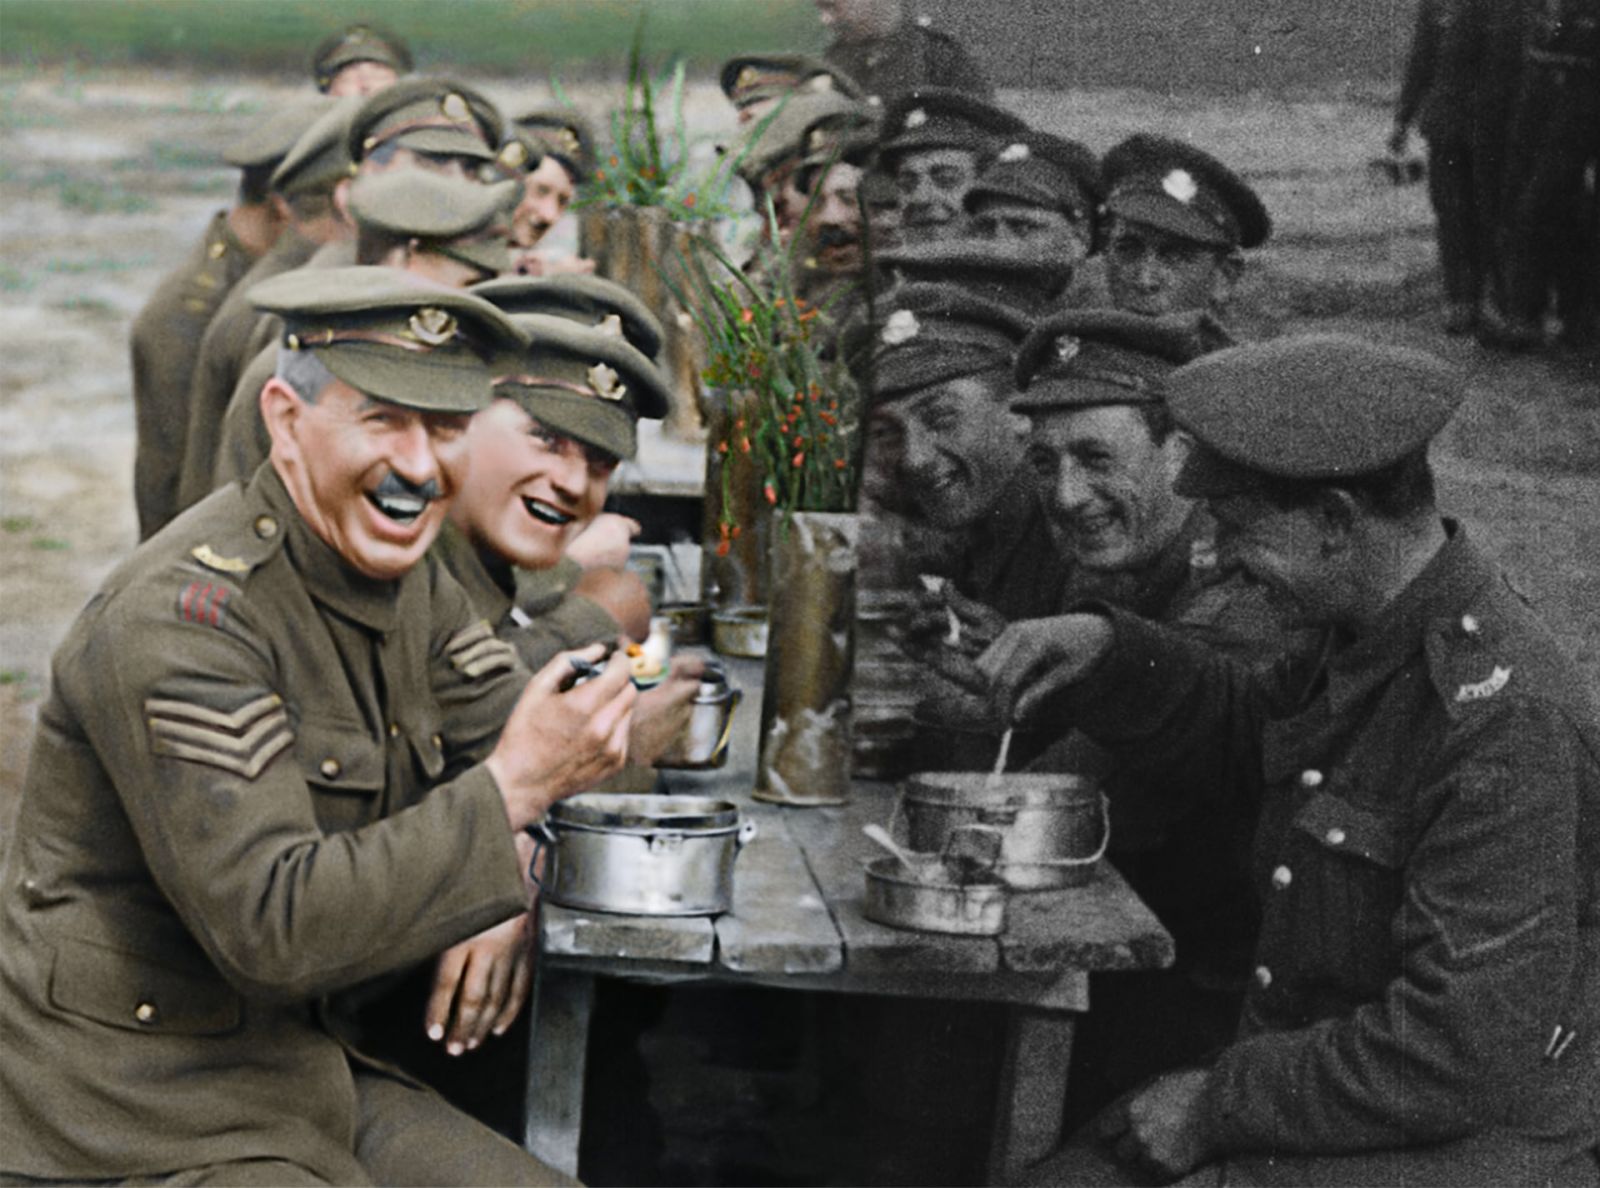 A before and after image showing the original film on the right and the restored and colorized image on the left in a moment from Peter Jackson’s acclaimed WWI documentary “They Shall Not Grow Old,” a Warner Bros. Pictures release. (Courtesy of Warner Bros. Pictures. © 2018 Imperial War Museum. Used with permission.)